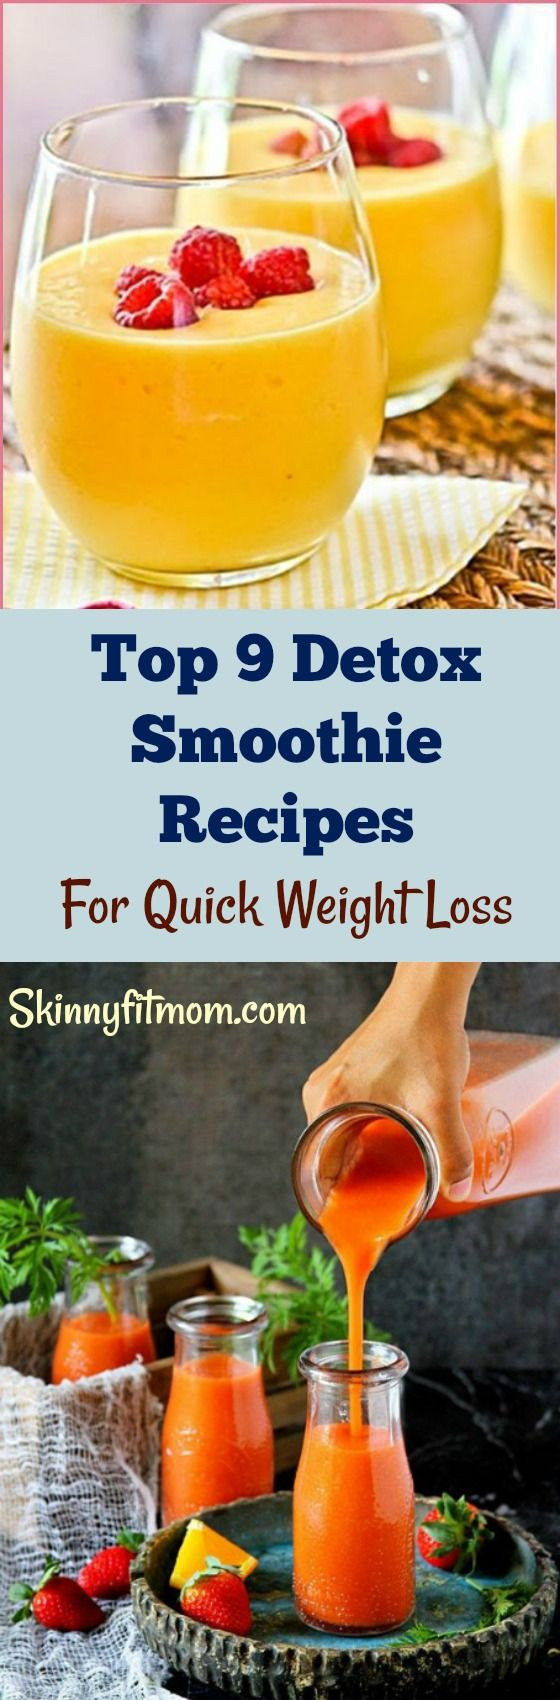 Quick Weight Loss Smoothies
 Top 9 Detox Smoothie Recipes for Quick Weight Loss lose